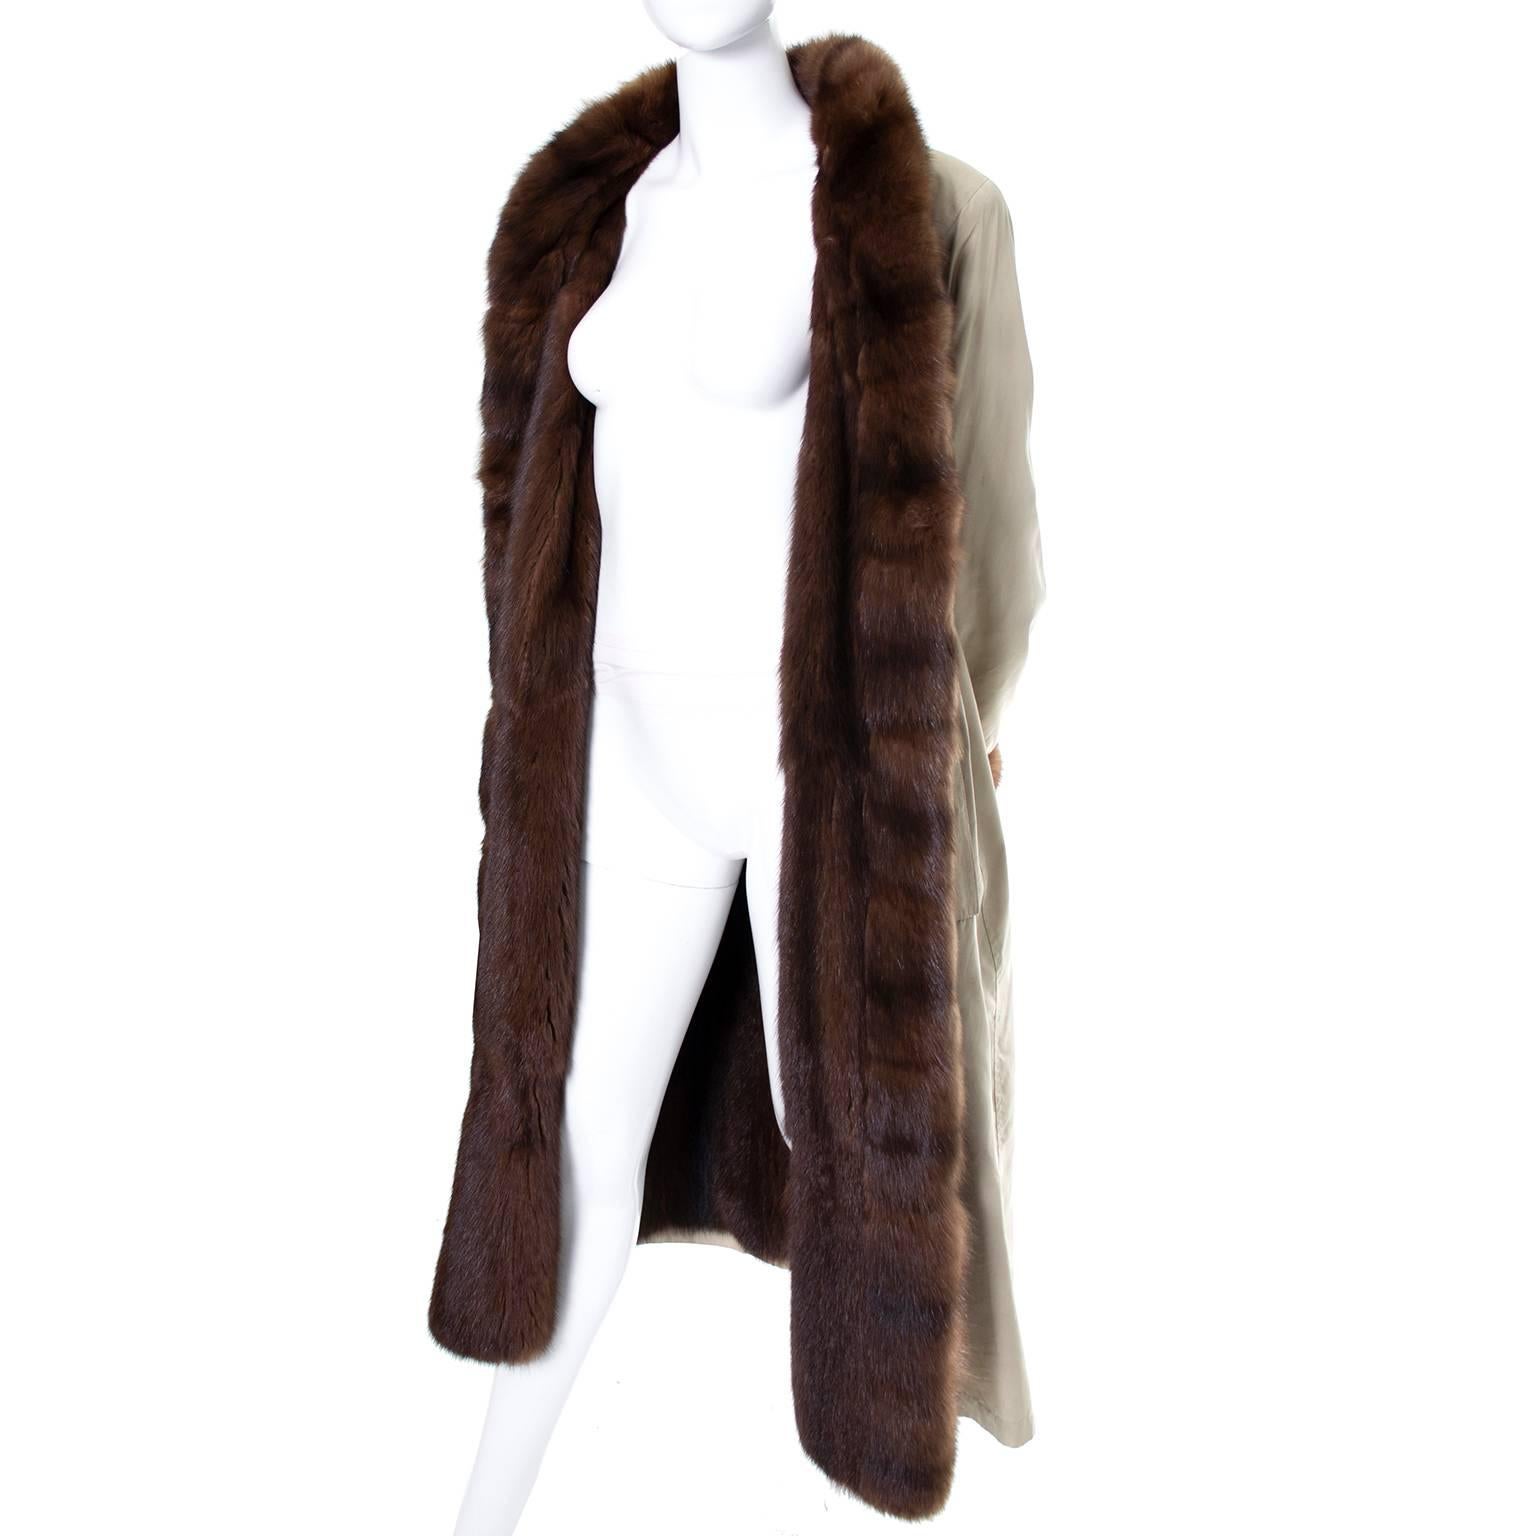 This timeless vintage Yves Saint Laurent coat was made in France and is lined with beautiful fur and comes with an optional belt. The bust fits up to size 44, and there is a hook so you can close it without having to wear the belt. The length of